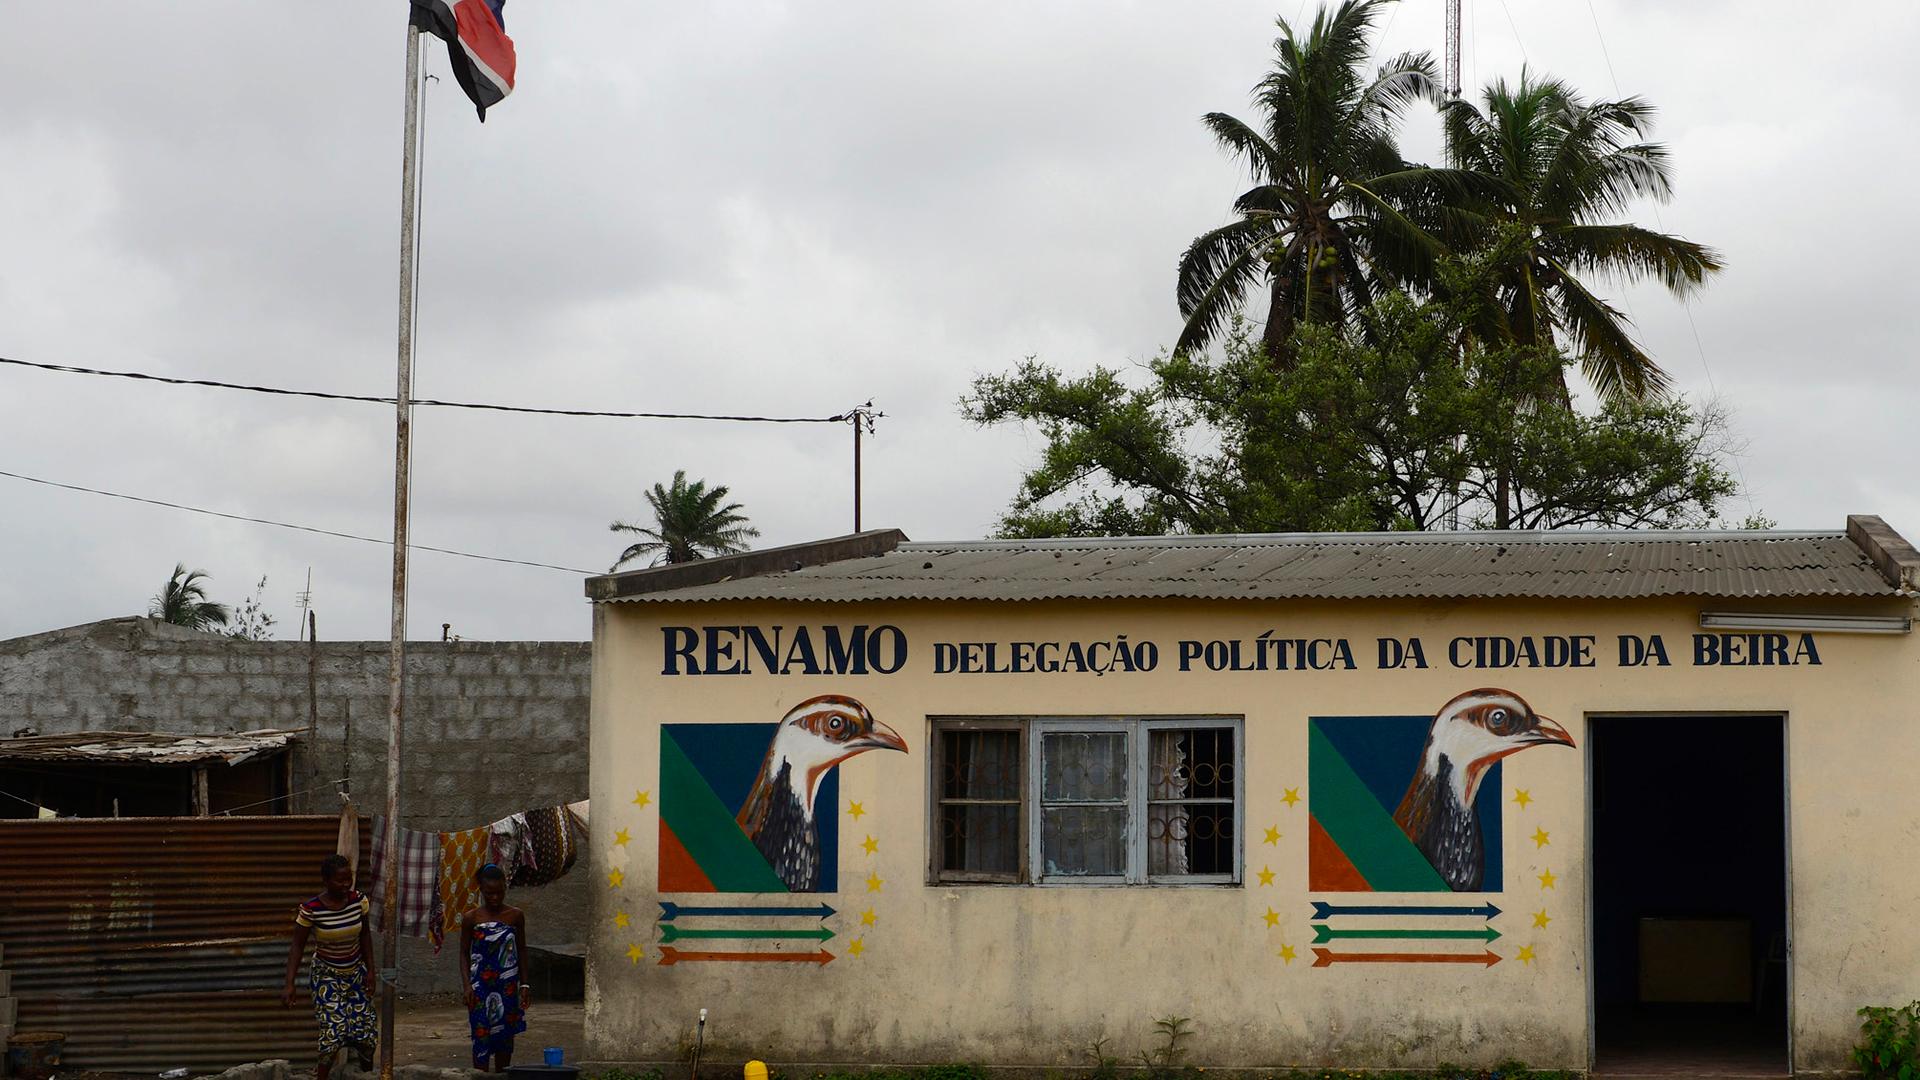 The abandoned headquarters of Mozambican opposition party Renamo is pictured in the port city of Beira, ahead of local government elections, Nov. 19, 2013. 